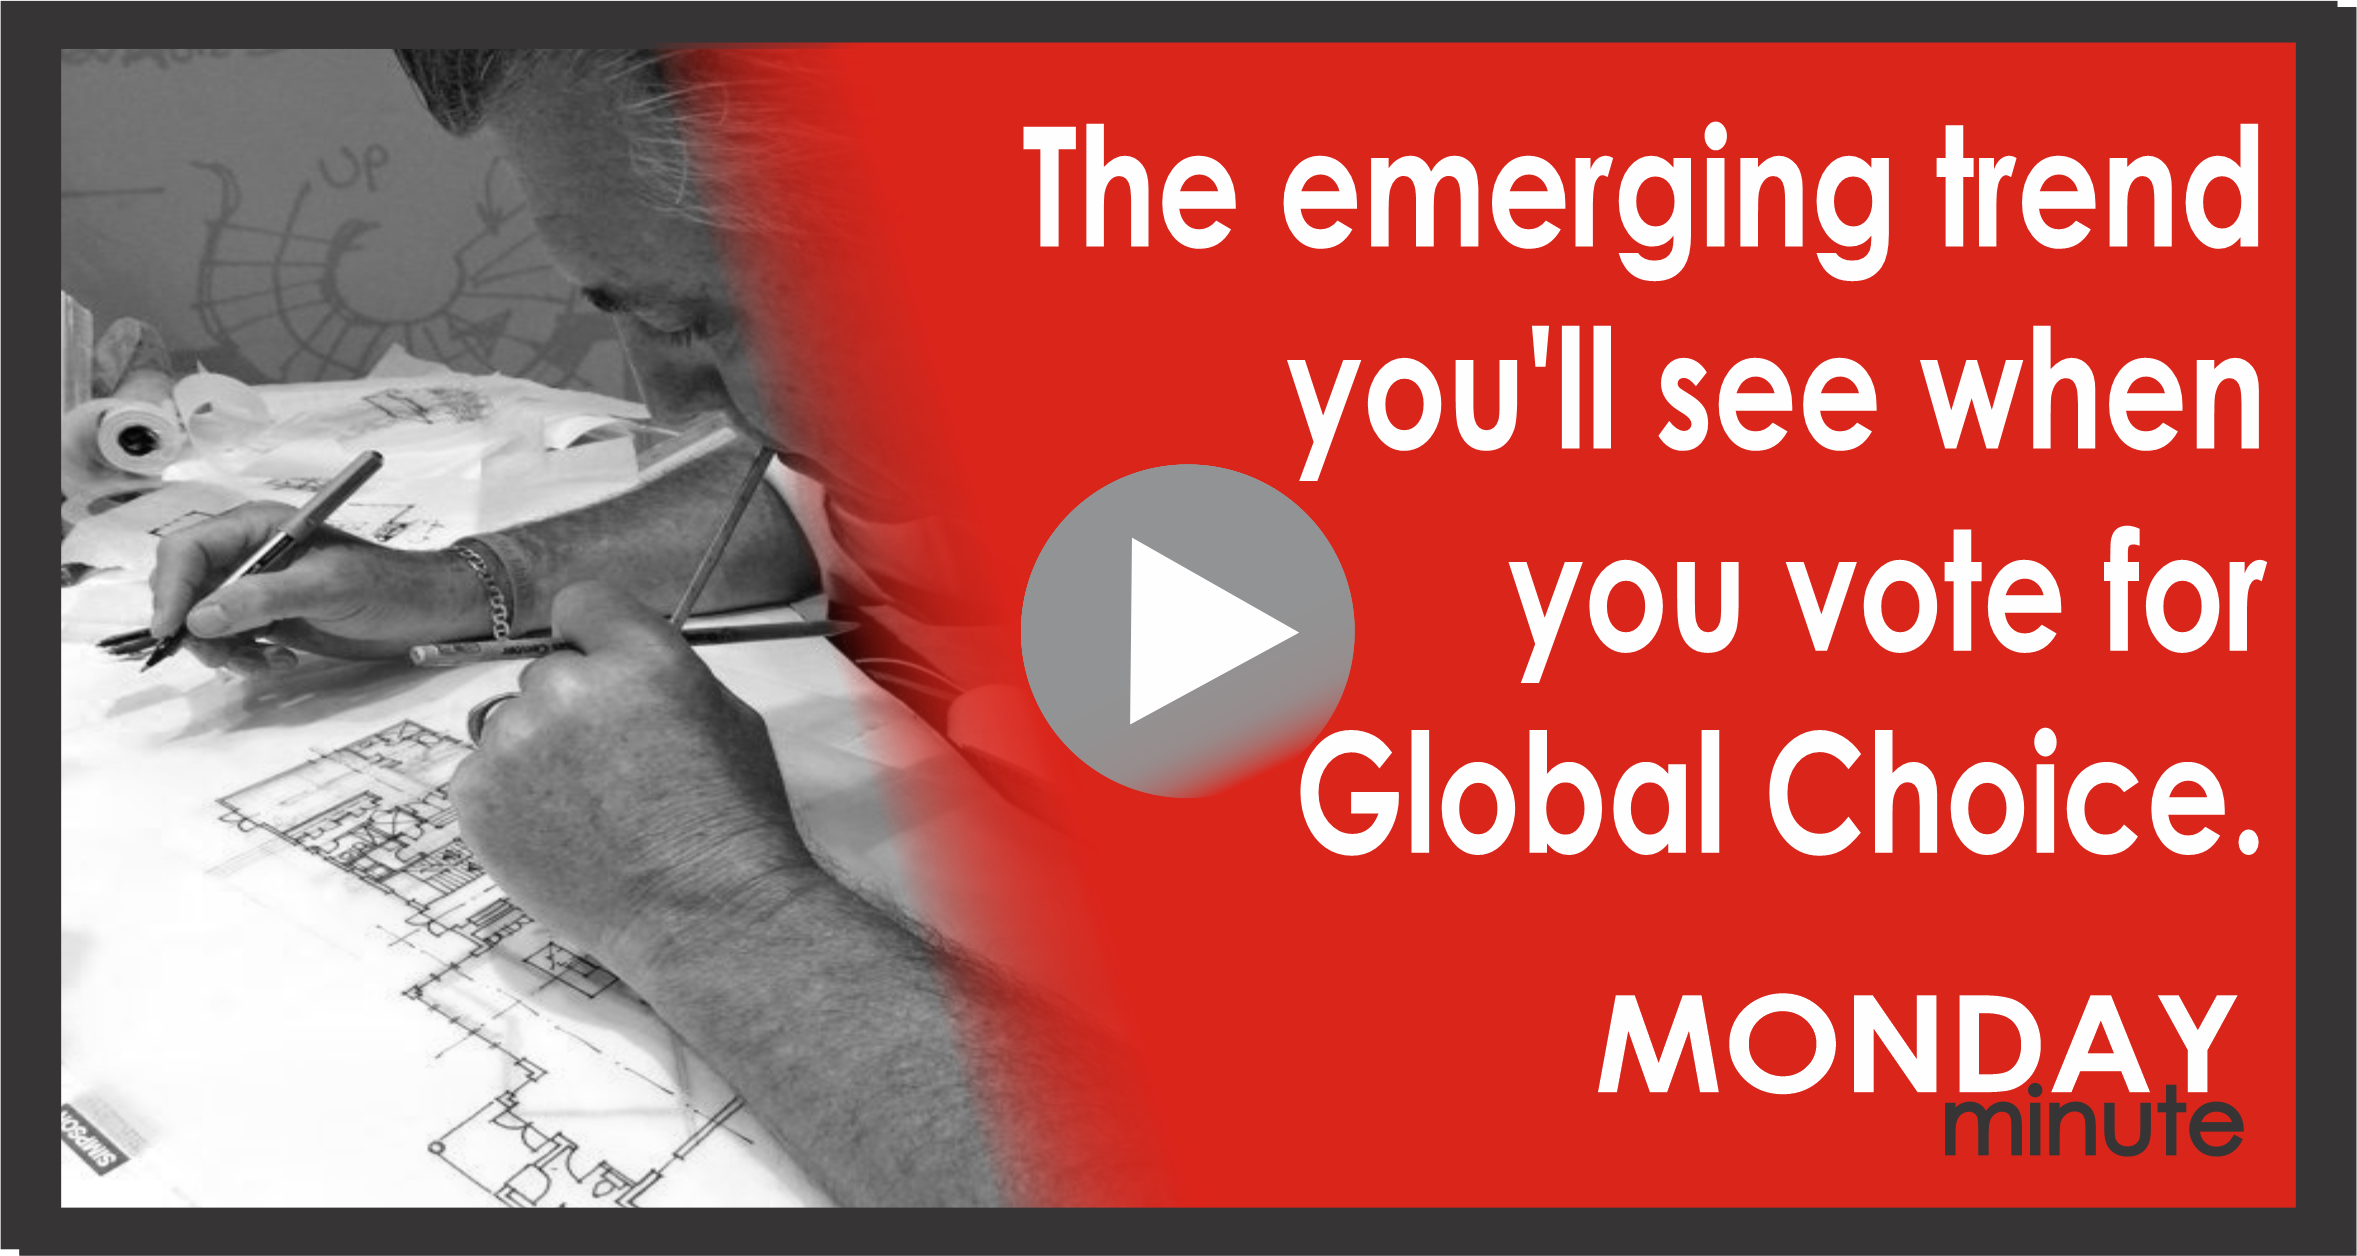 The emerging trend you'll see when you vote for Global Choice.